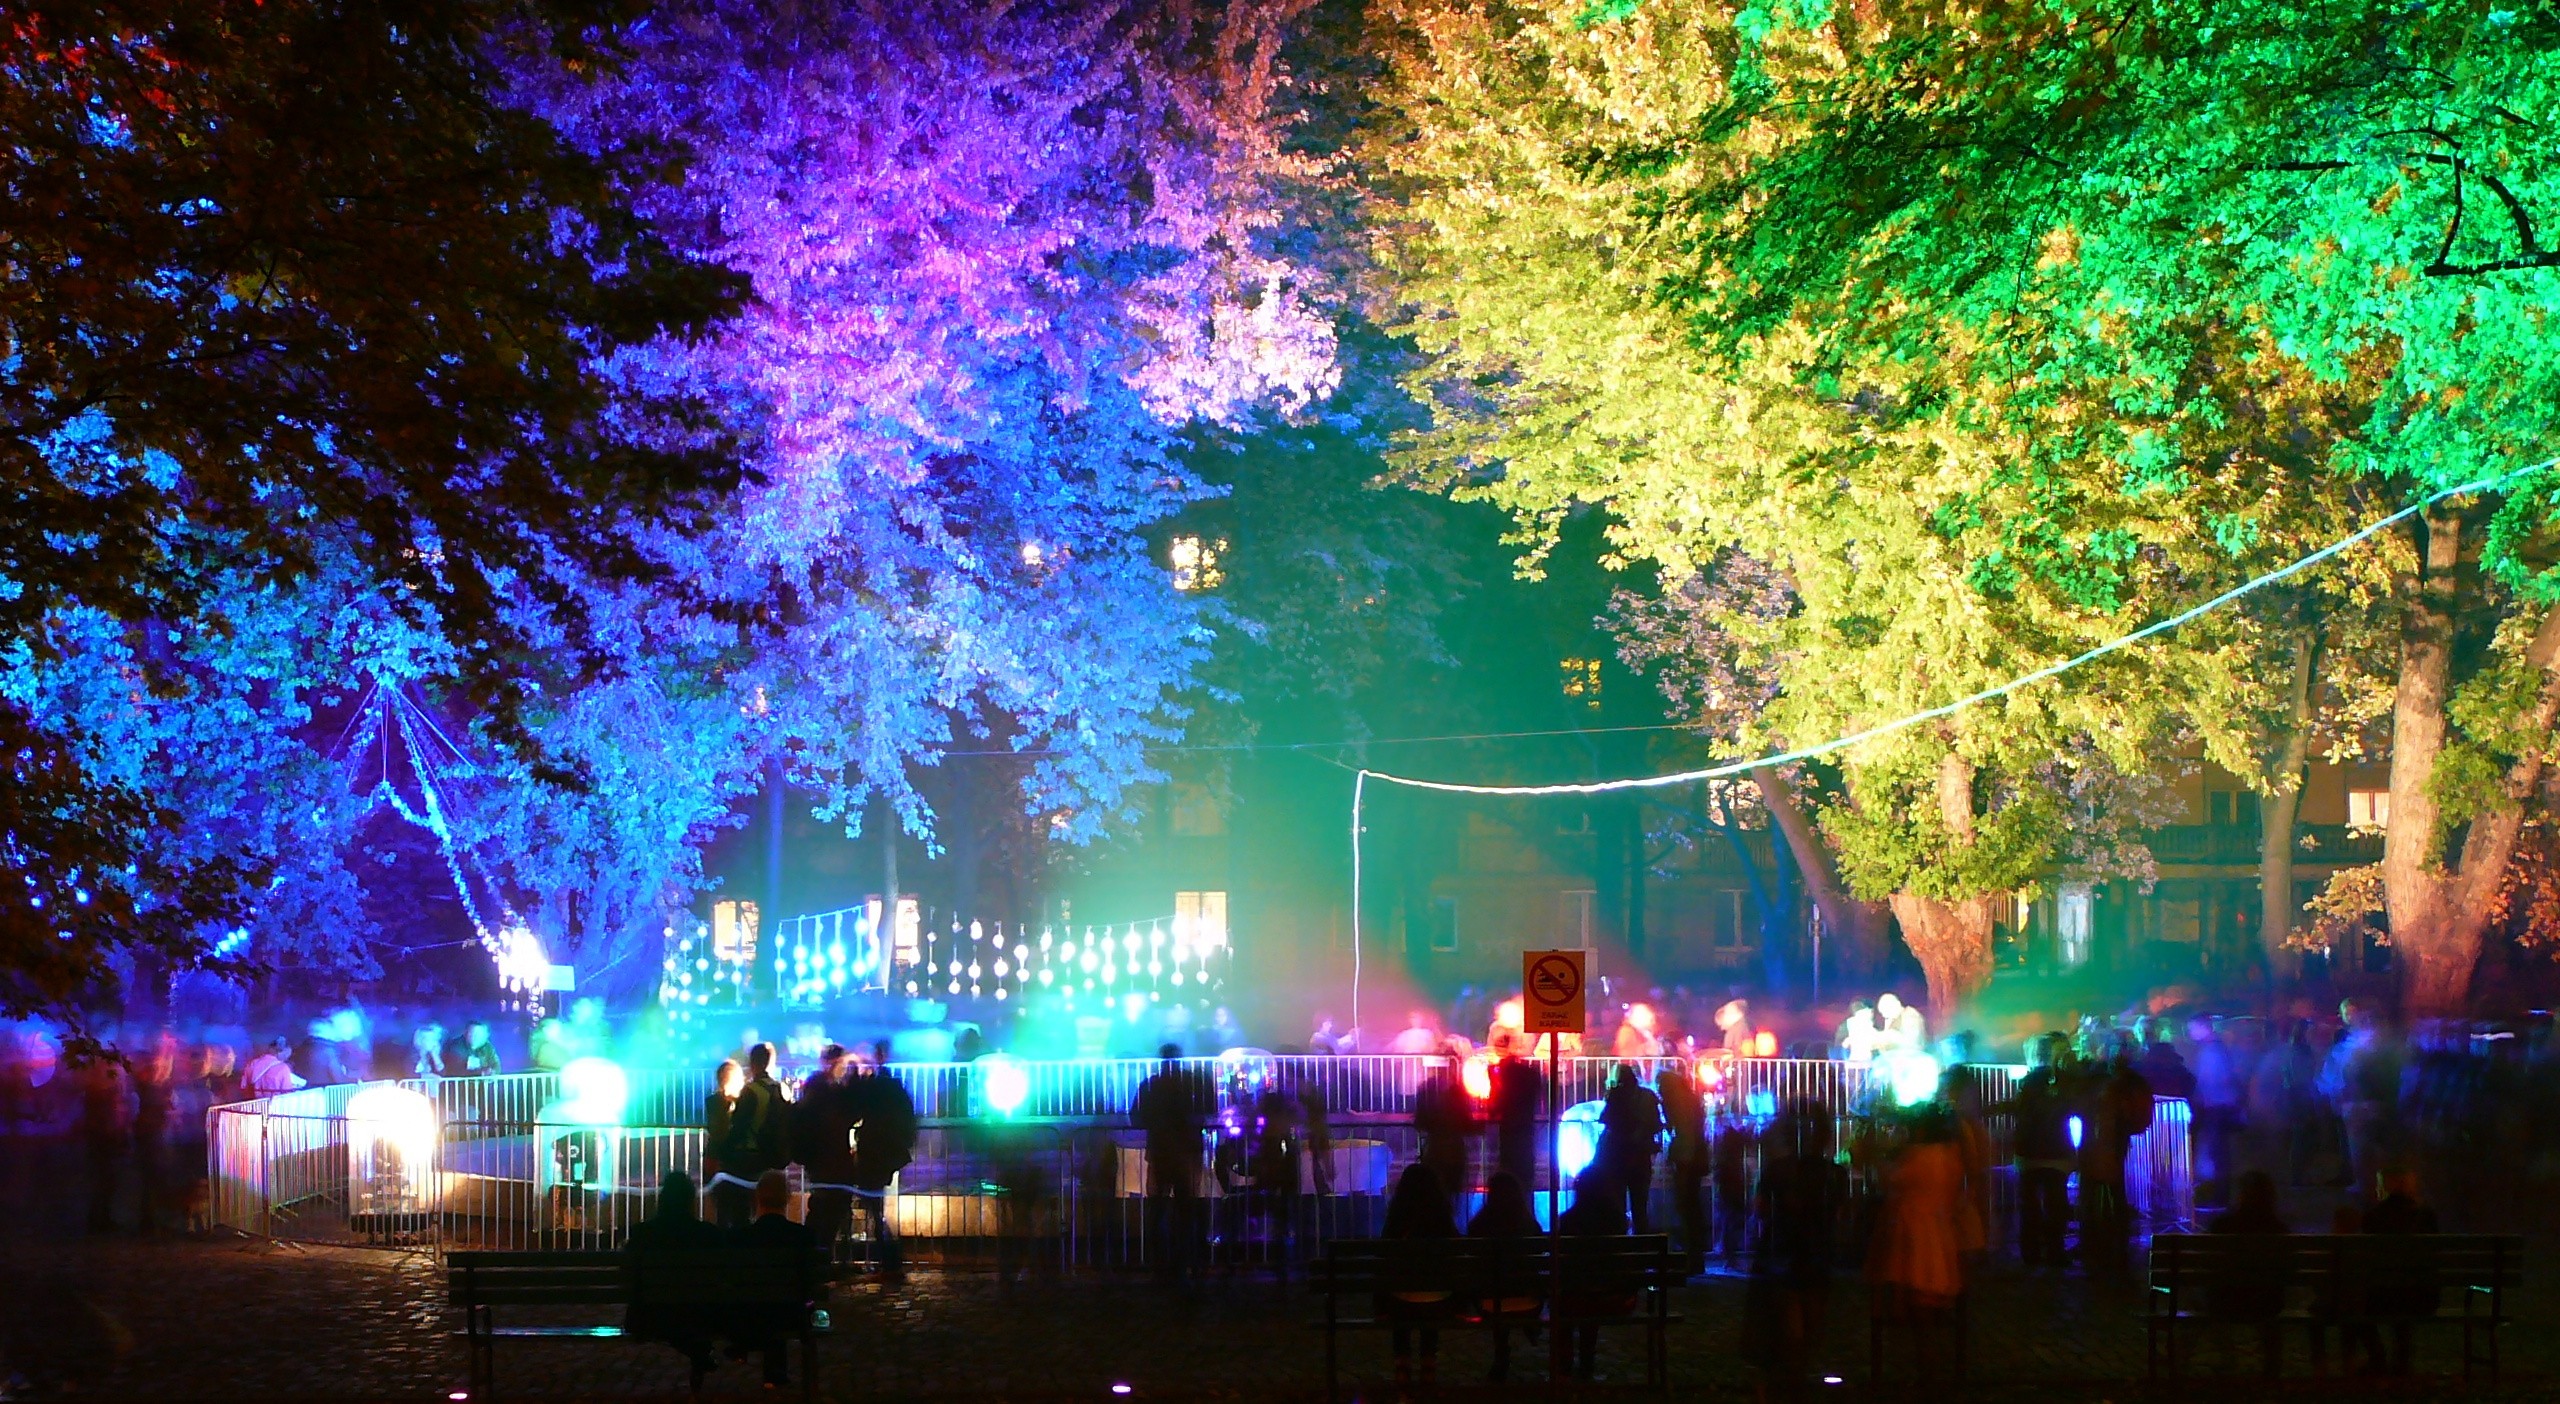 General 2560x1404 colorful trees lights park people night